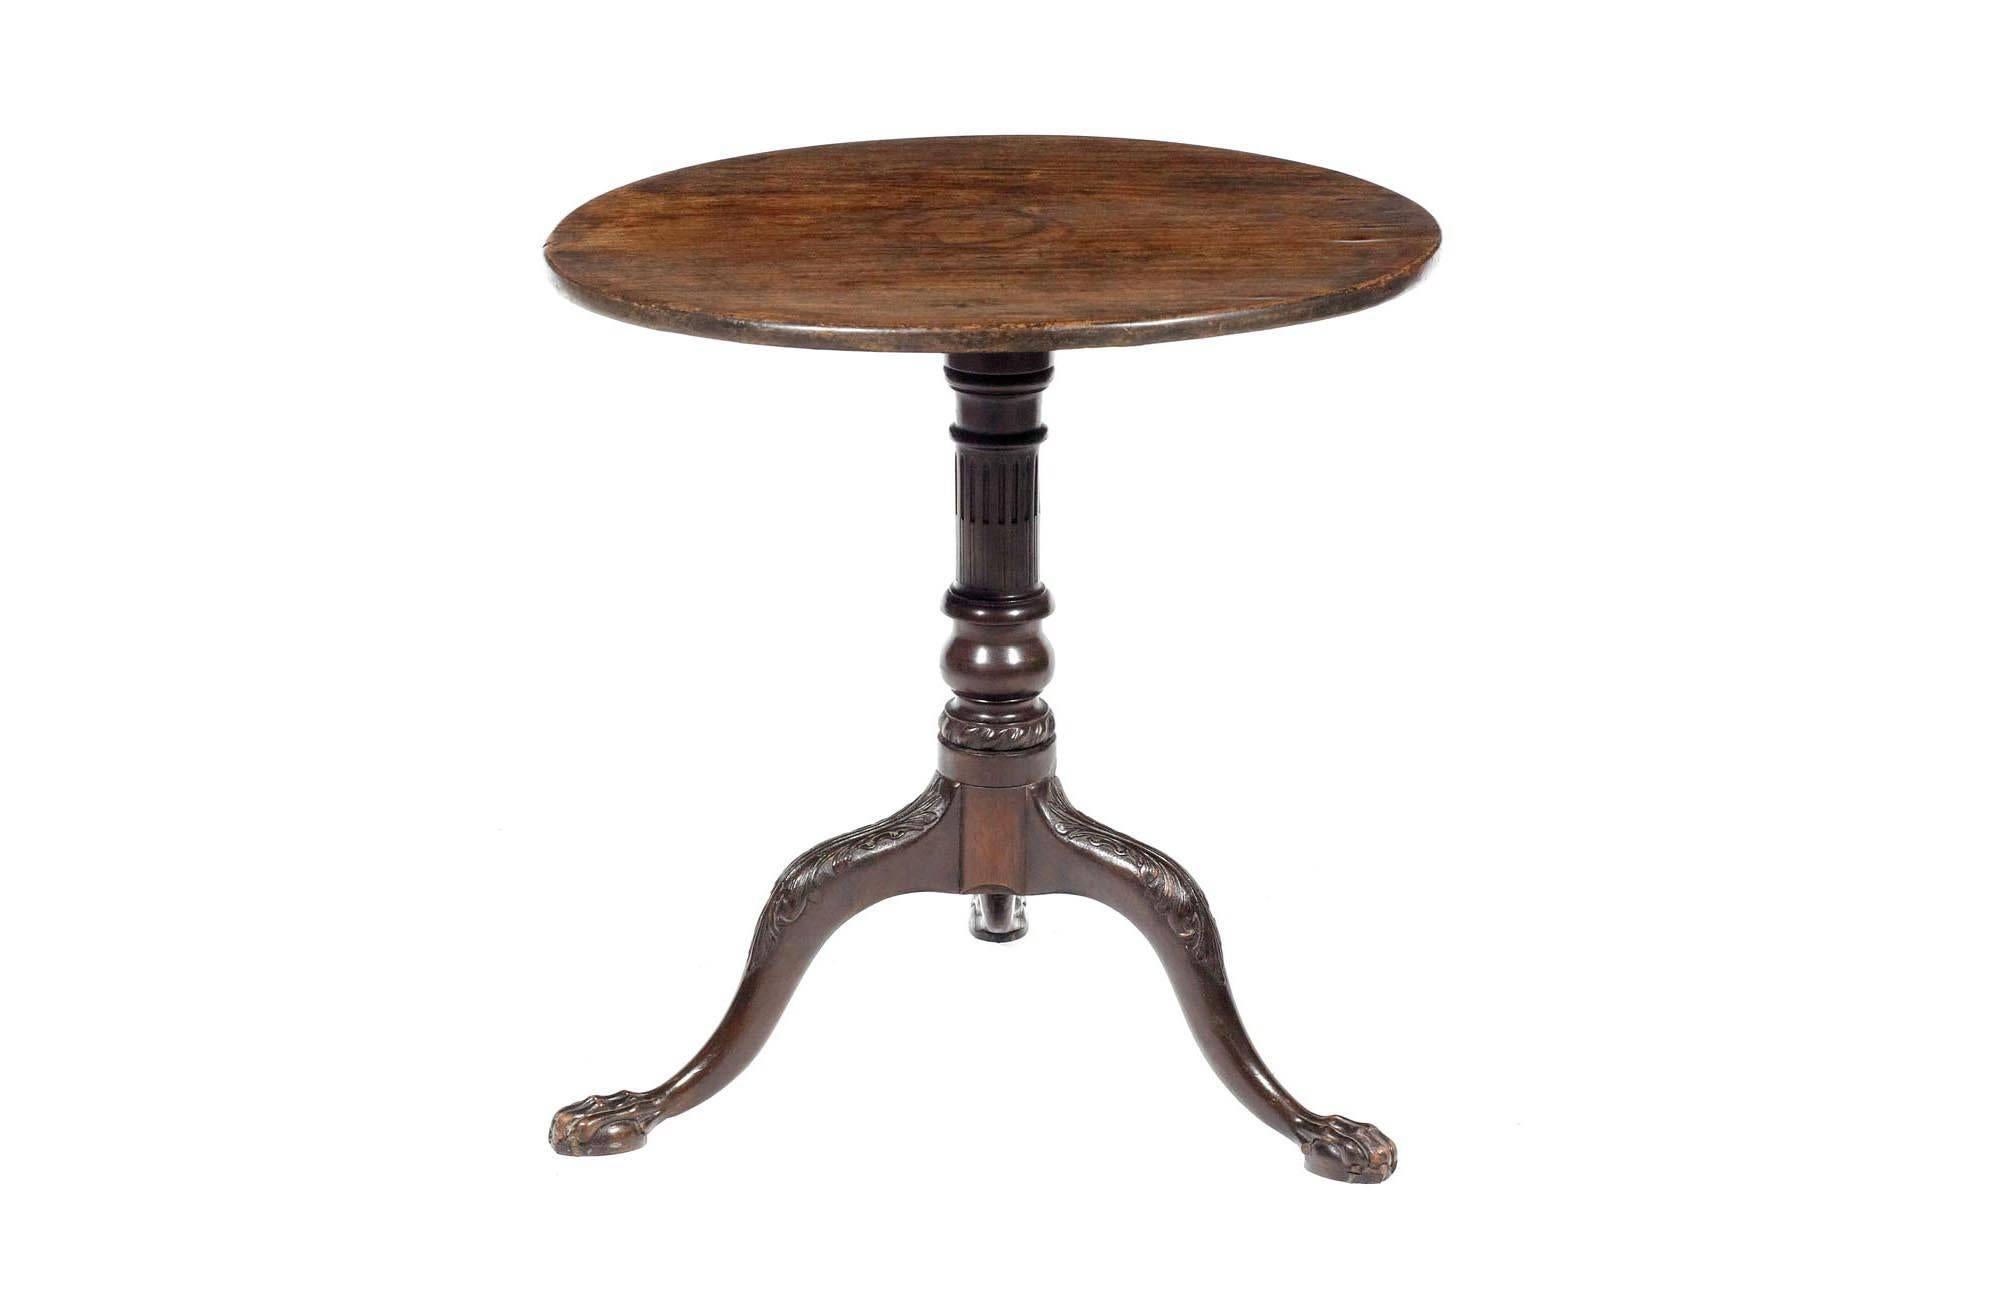 19th century George III mahogany tilt-top occasional circular table. The top on a gun barrel column, supported on three carved legs and claw feet.